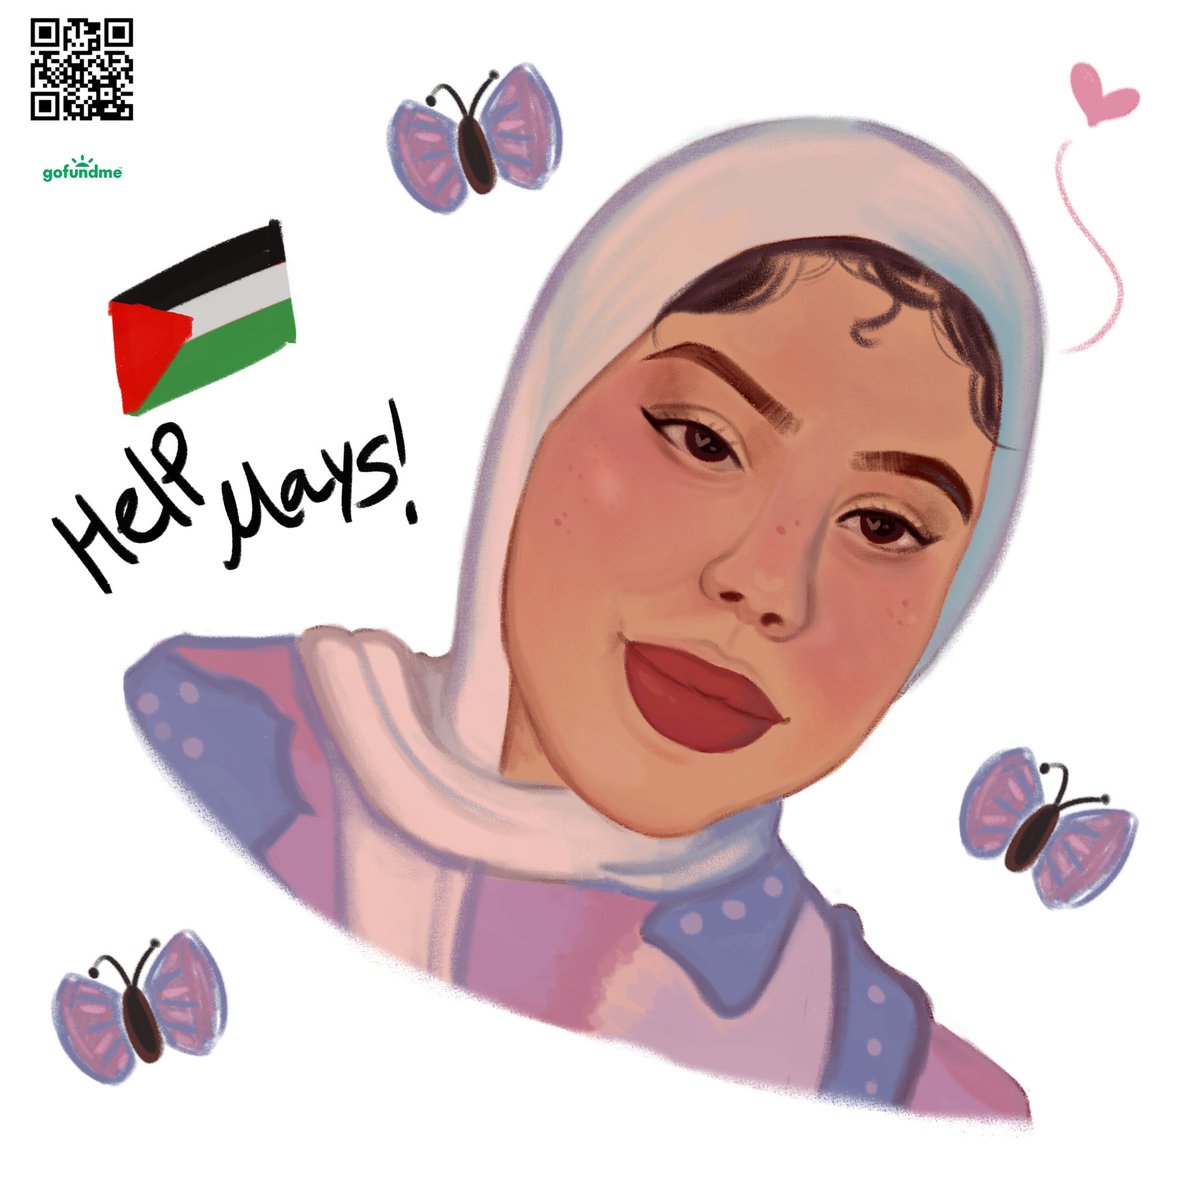 ‼️‼️ D0NATE & SHARE ‼️‼️

This is a drawing of Mays. (@Mays_ayyad) A 19 year old girl from Gaza. She has 5 family members. She is raising funds to evacuate to Egypt. Her and her family have been displaced 5 times and are struggling every day. Please help. gofund.me/c8157cda